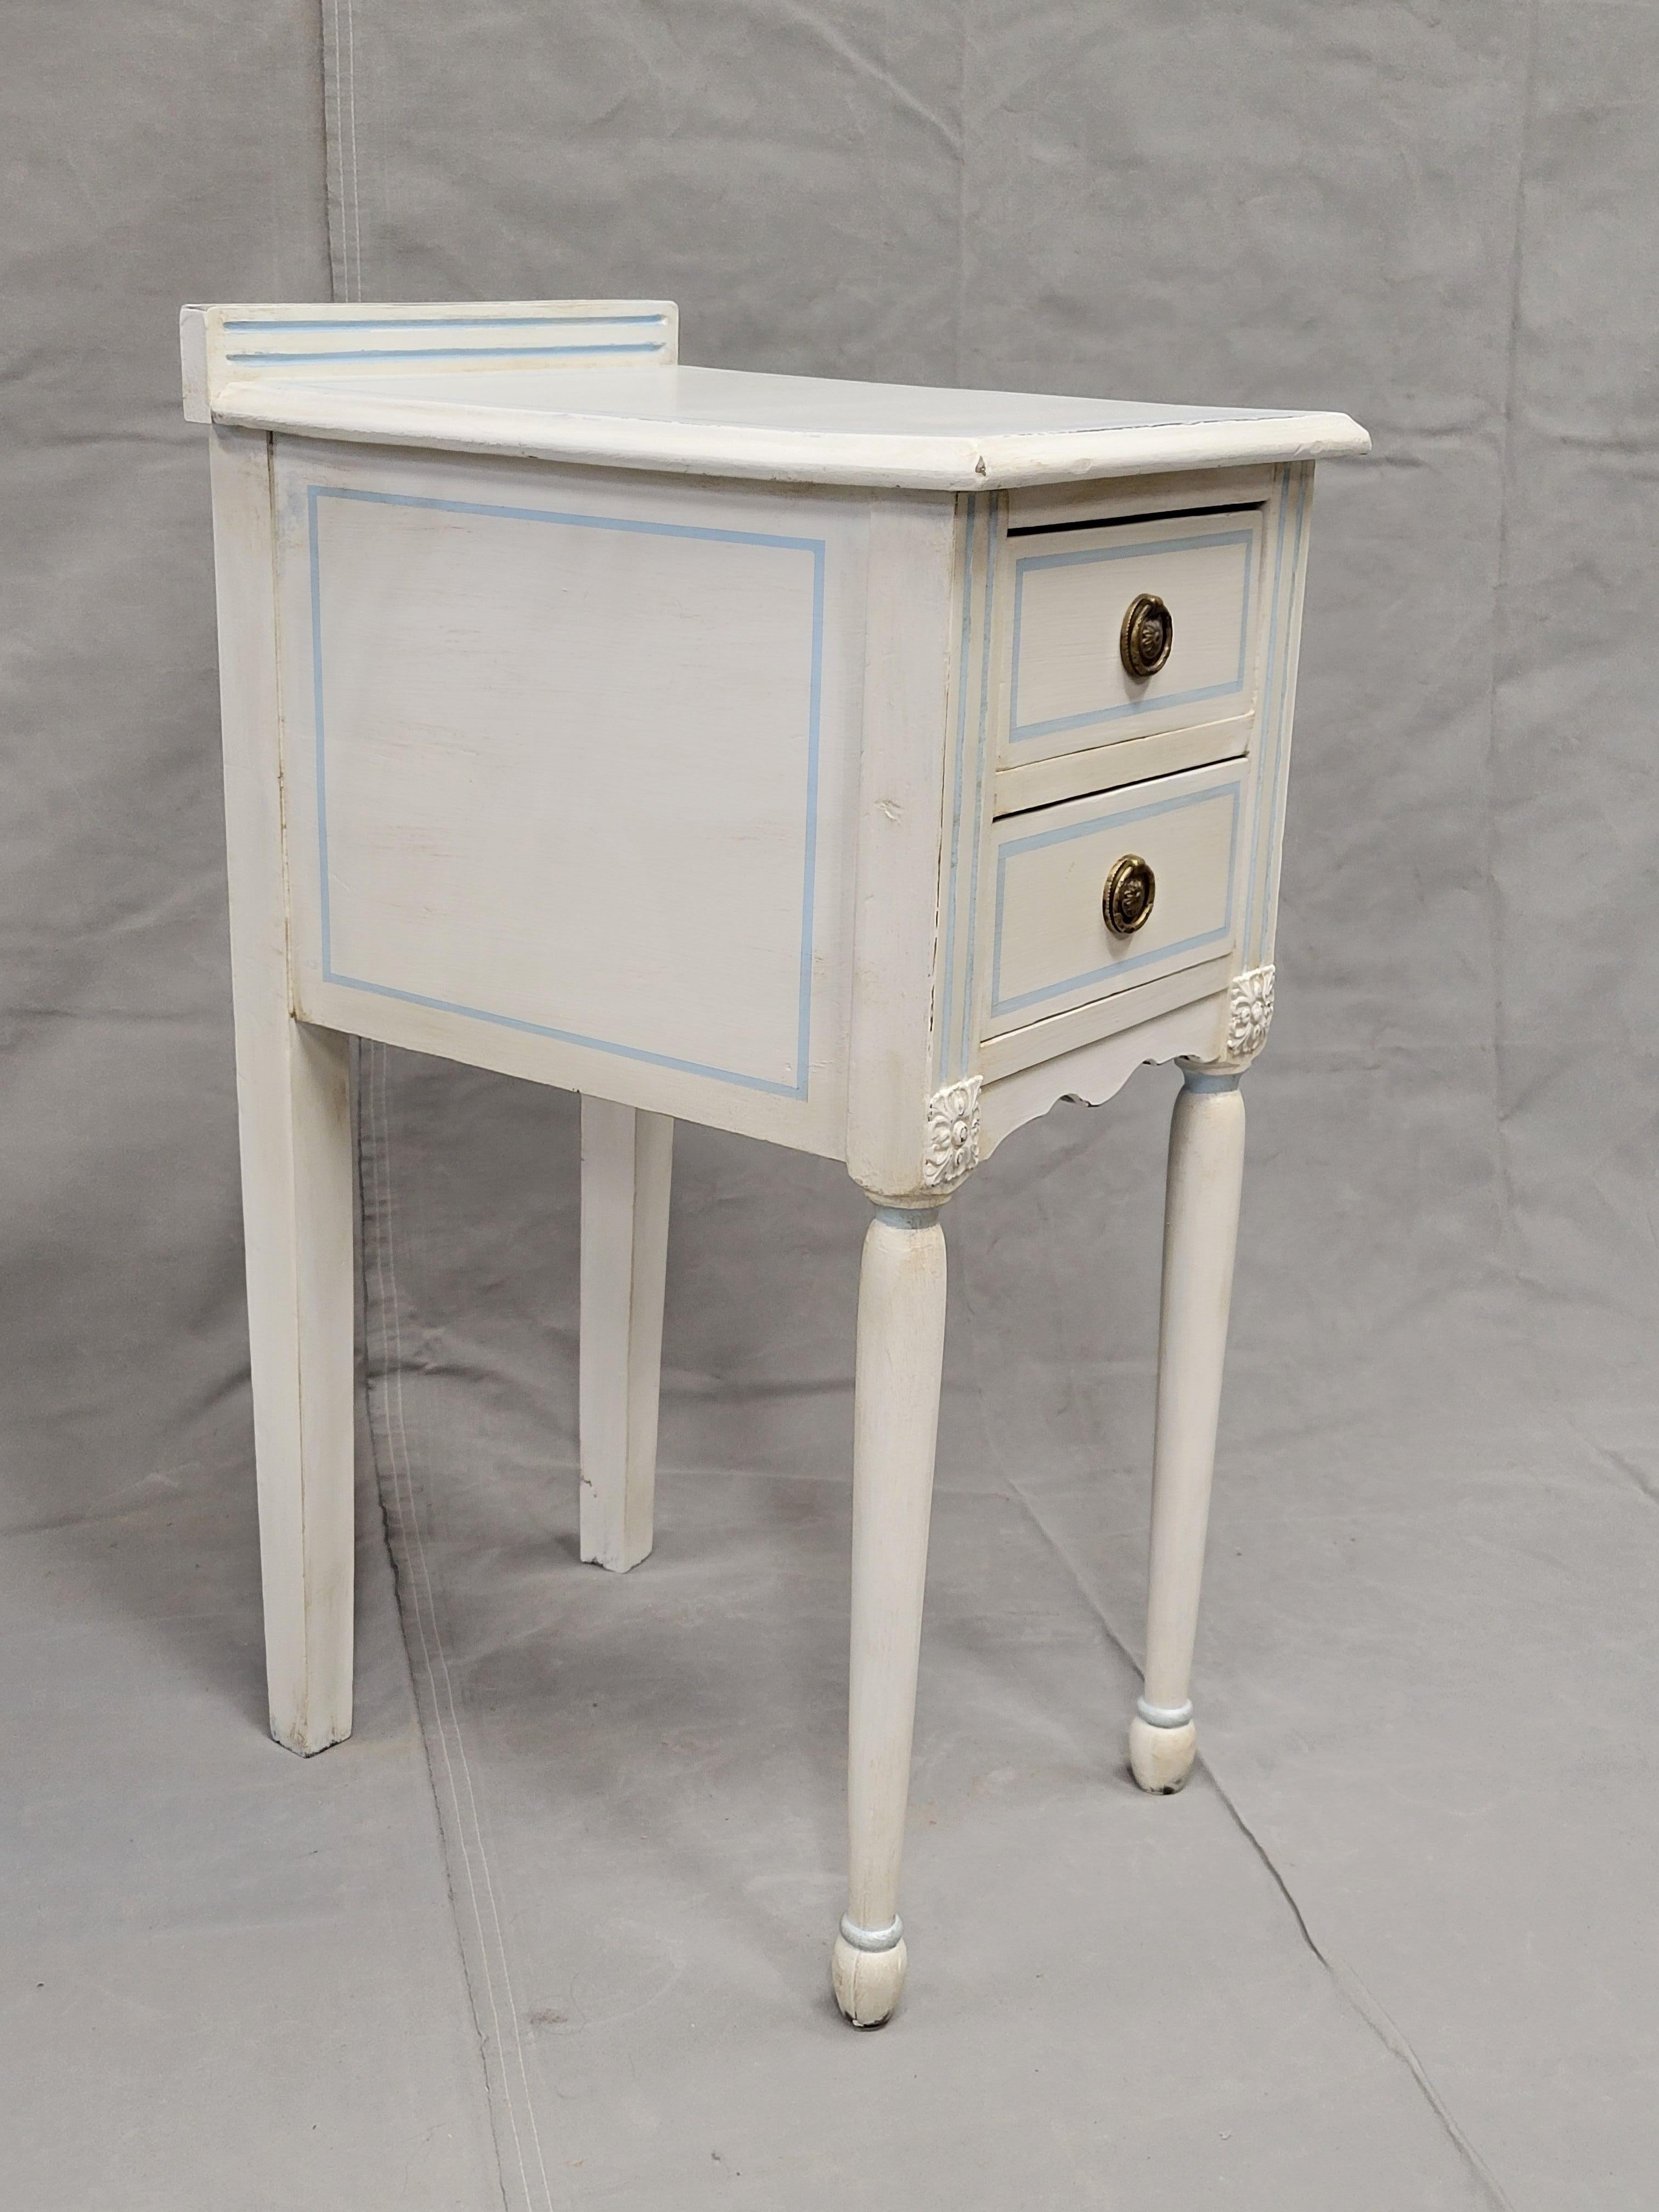 Neoclassical Revival Vintage White Nightstands With Blue Striping - a Pair